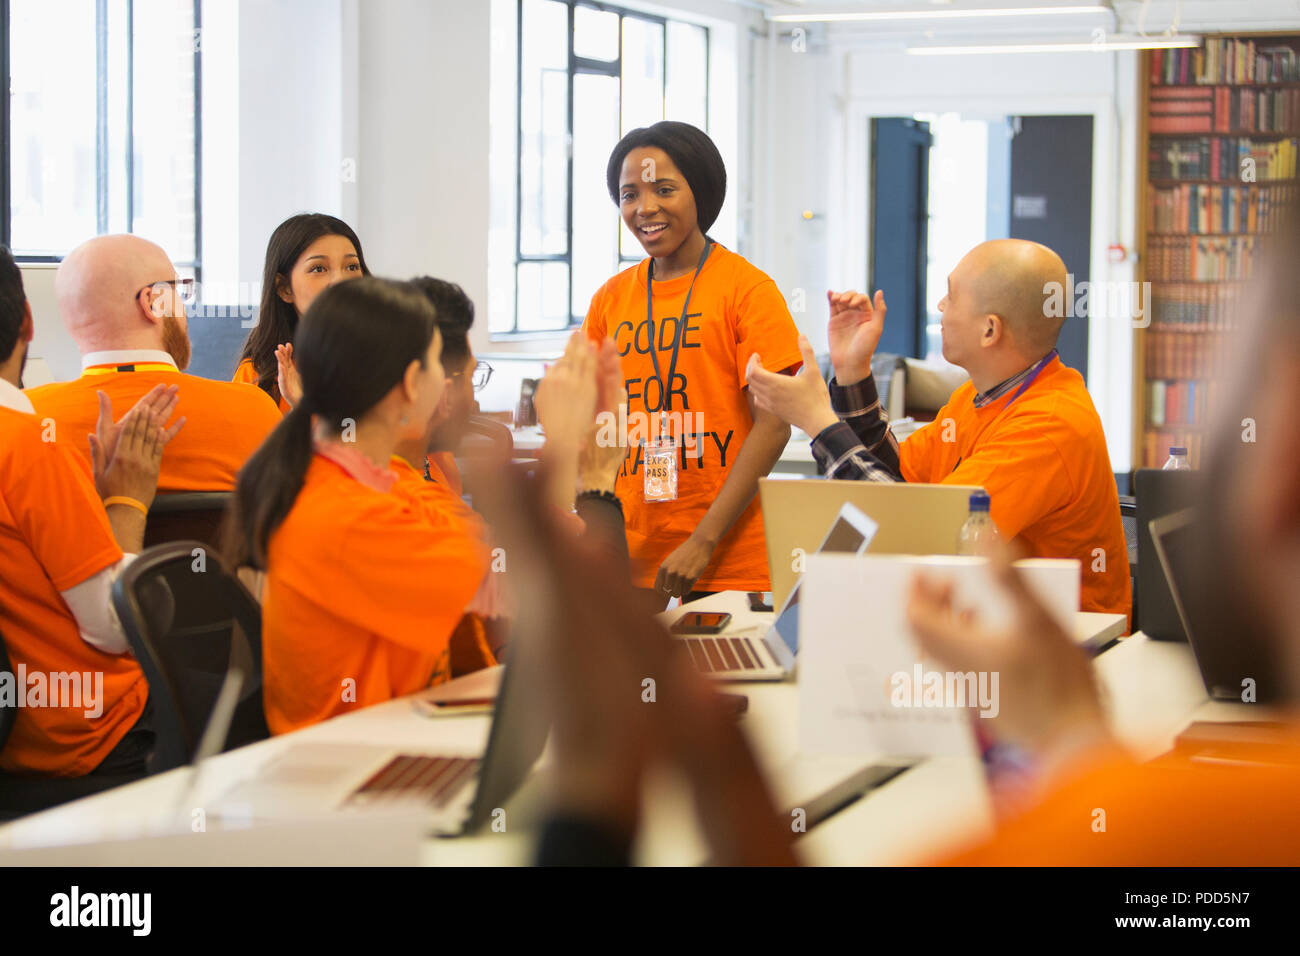 Hackers cheering for woman, coding for charity at hackathon Stock Photo